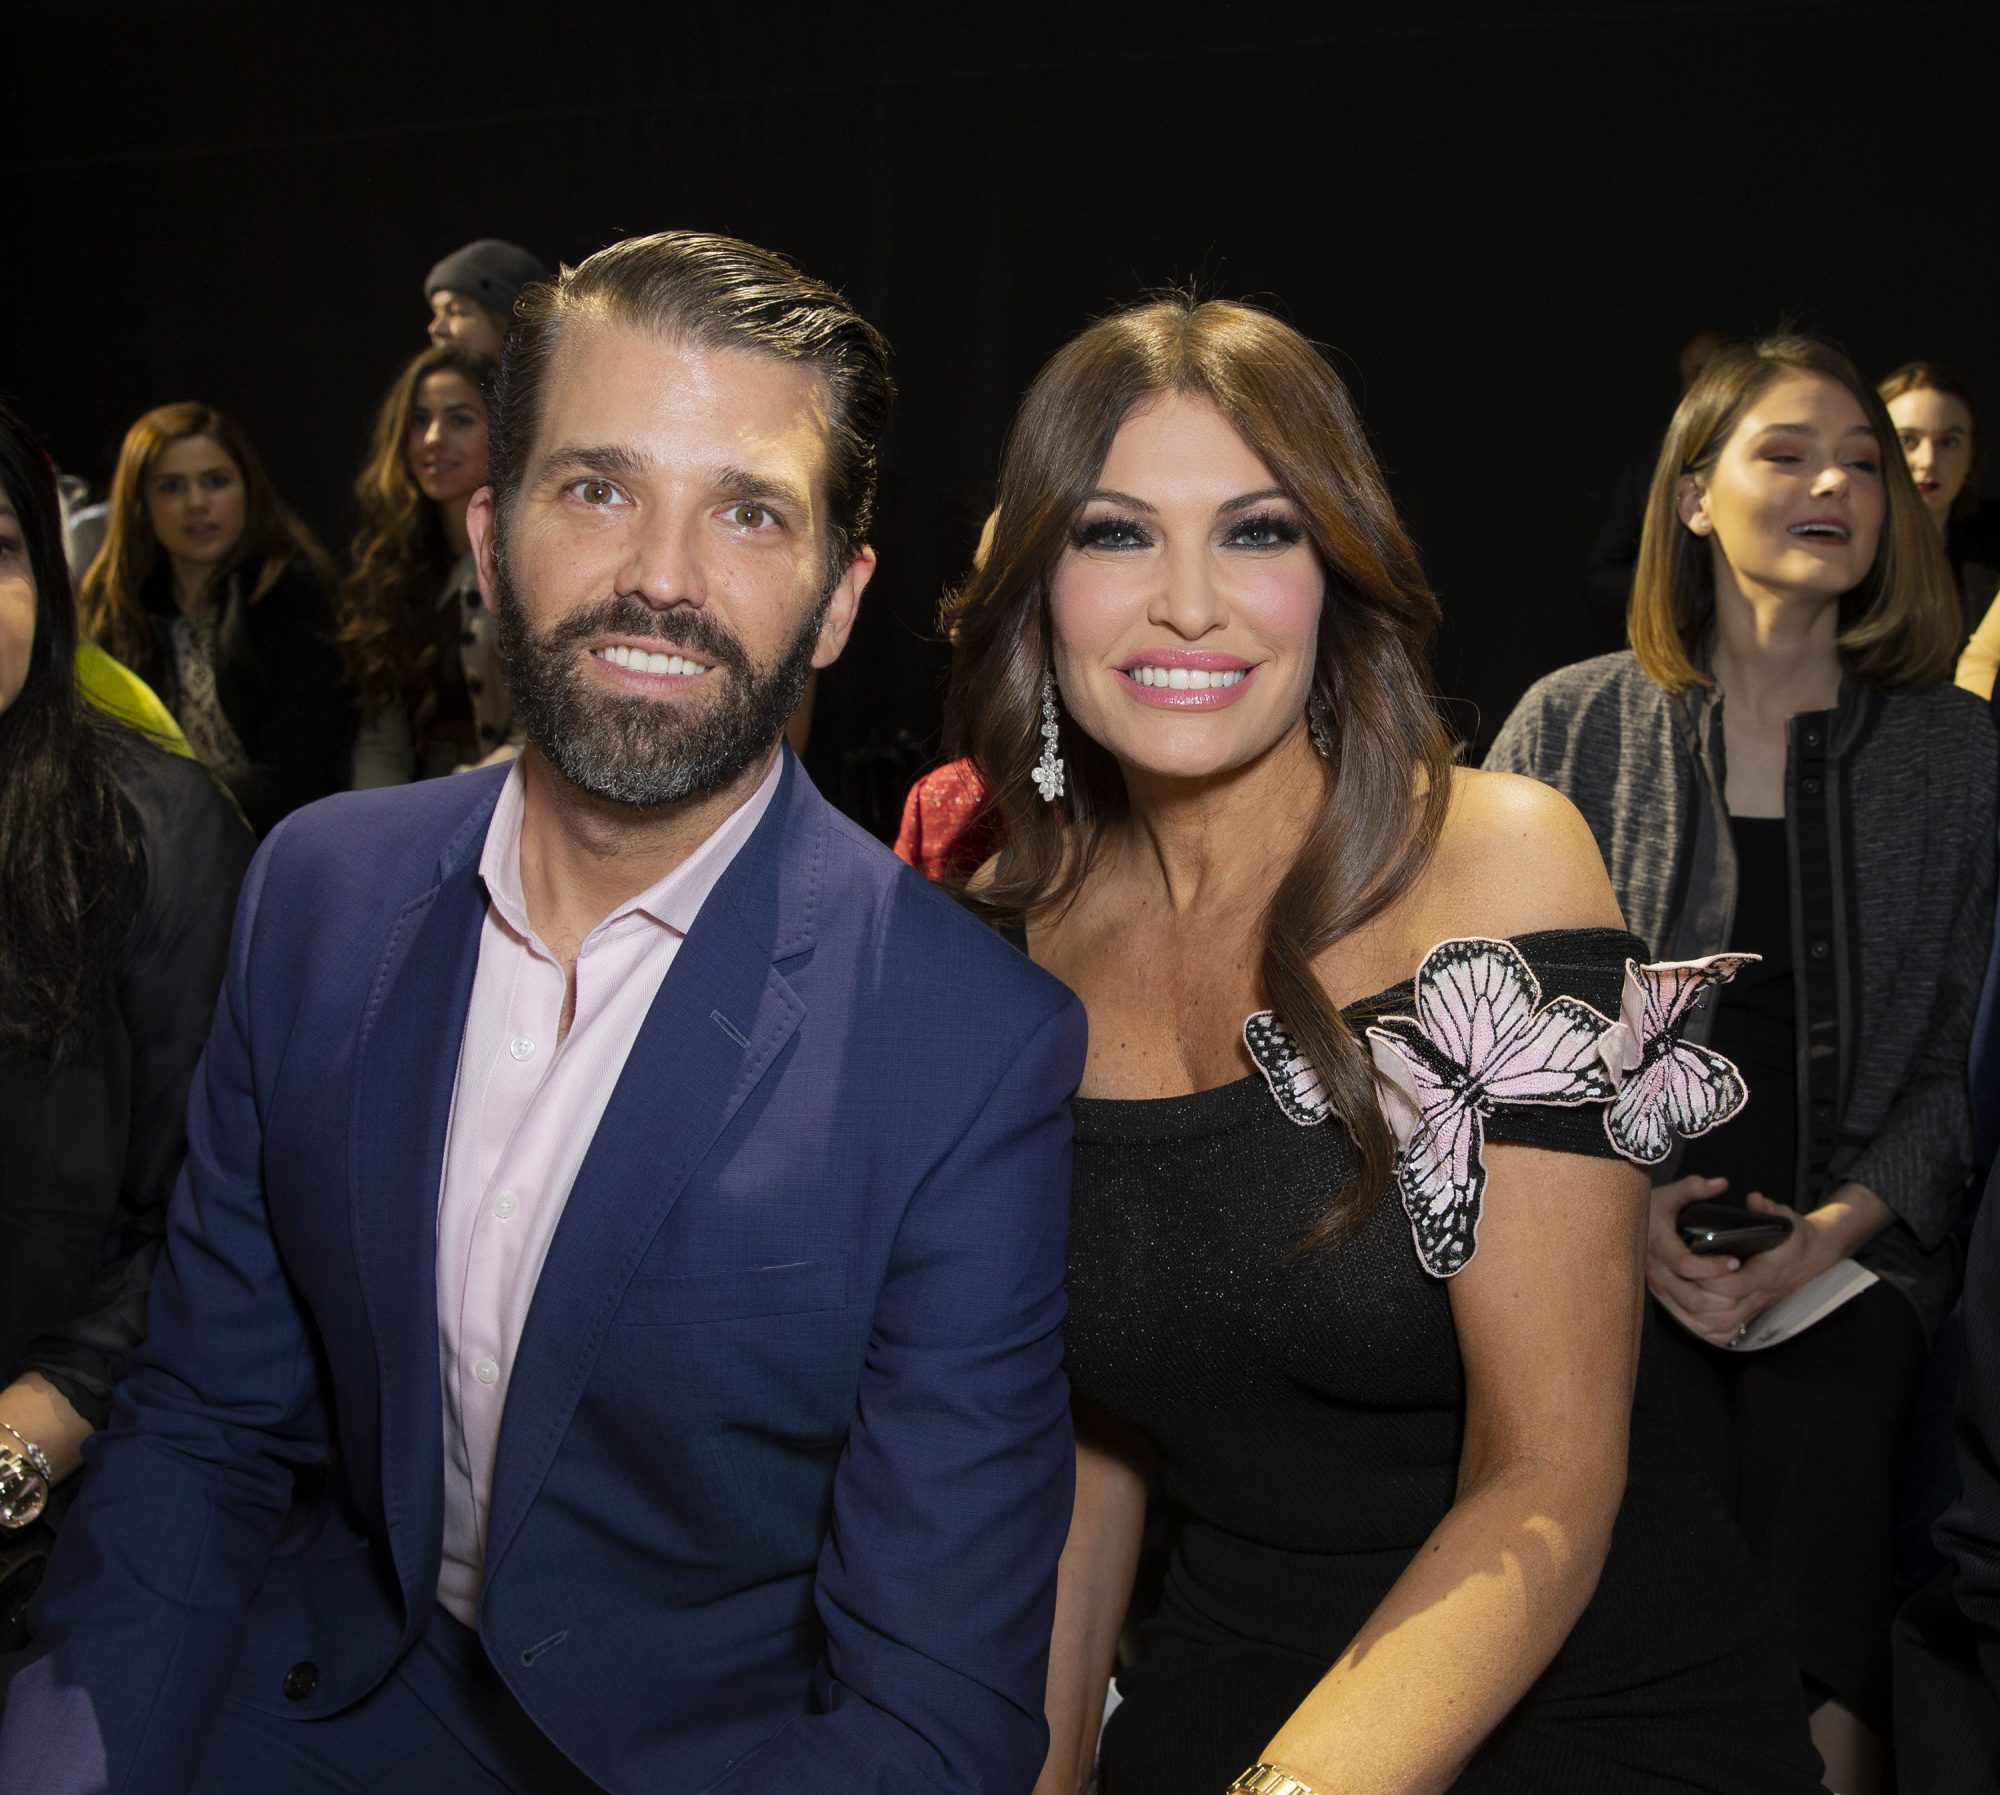 Who Is Donald Trump Jr Dating?